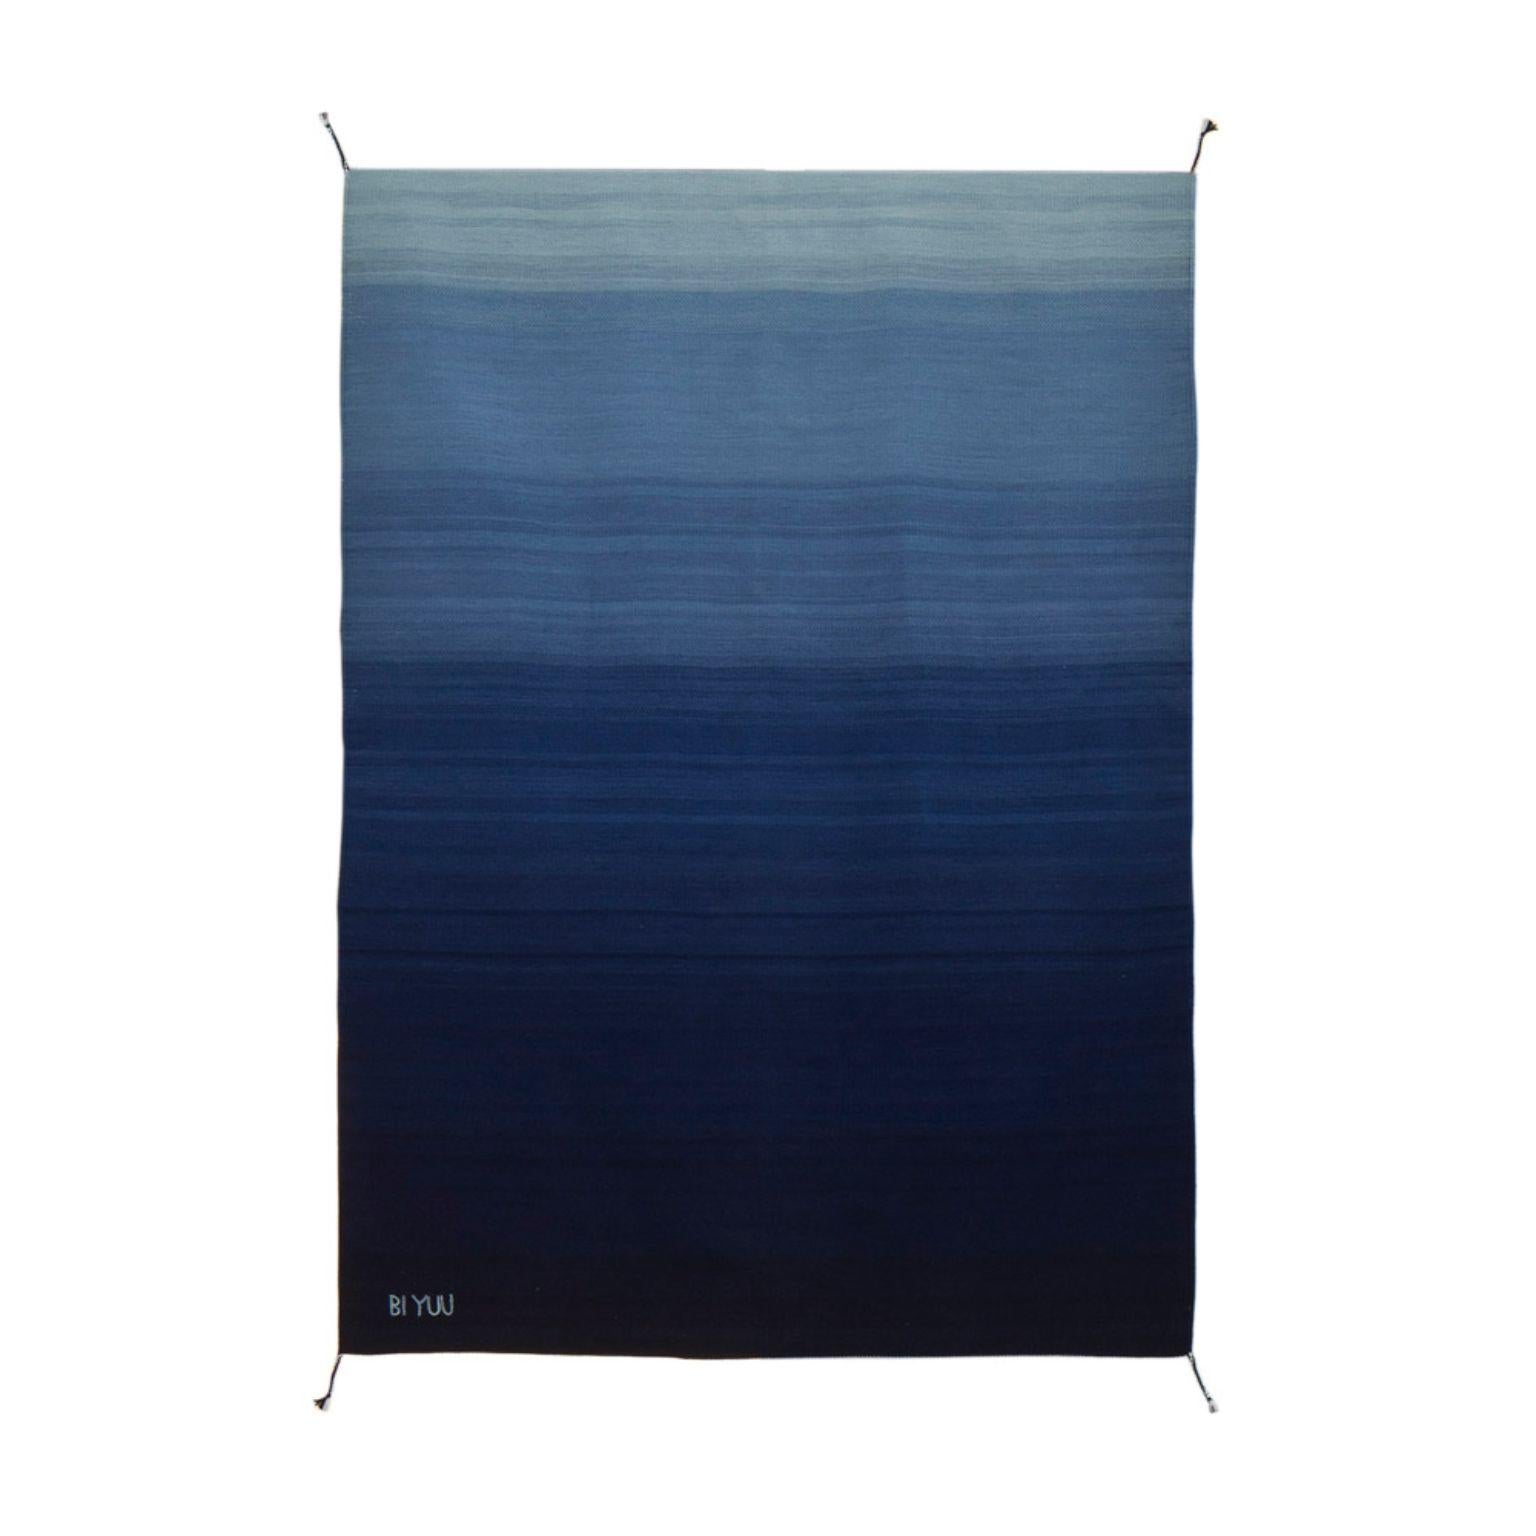 Ares II AII02 Rug by Bi Yuu
Dimensions: D200 x 300 H cm
Material: 70% Lincoln Wool / 30% Merino Wool
Density: 2800 yam passes per m2.
Also Available in different dimensions. Dye: Natural and Colorants.

She founded Bi Yuu with the vision that